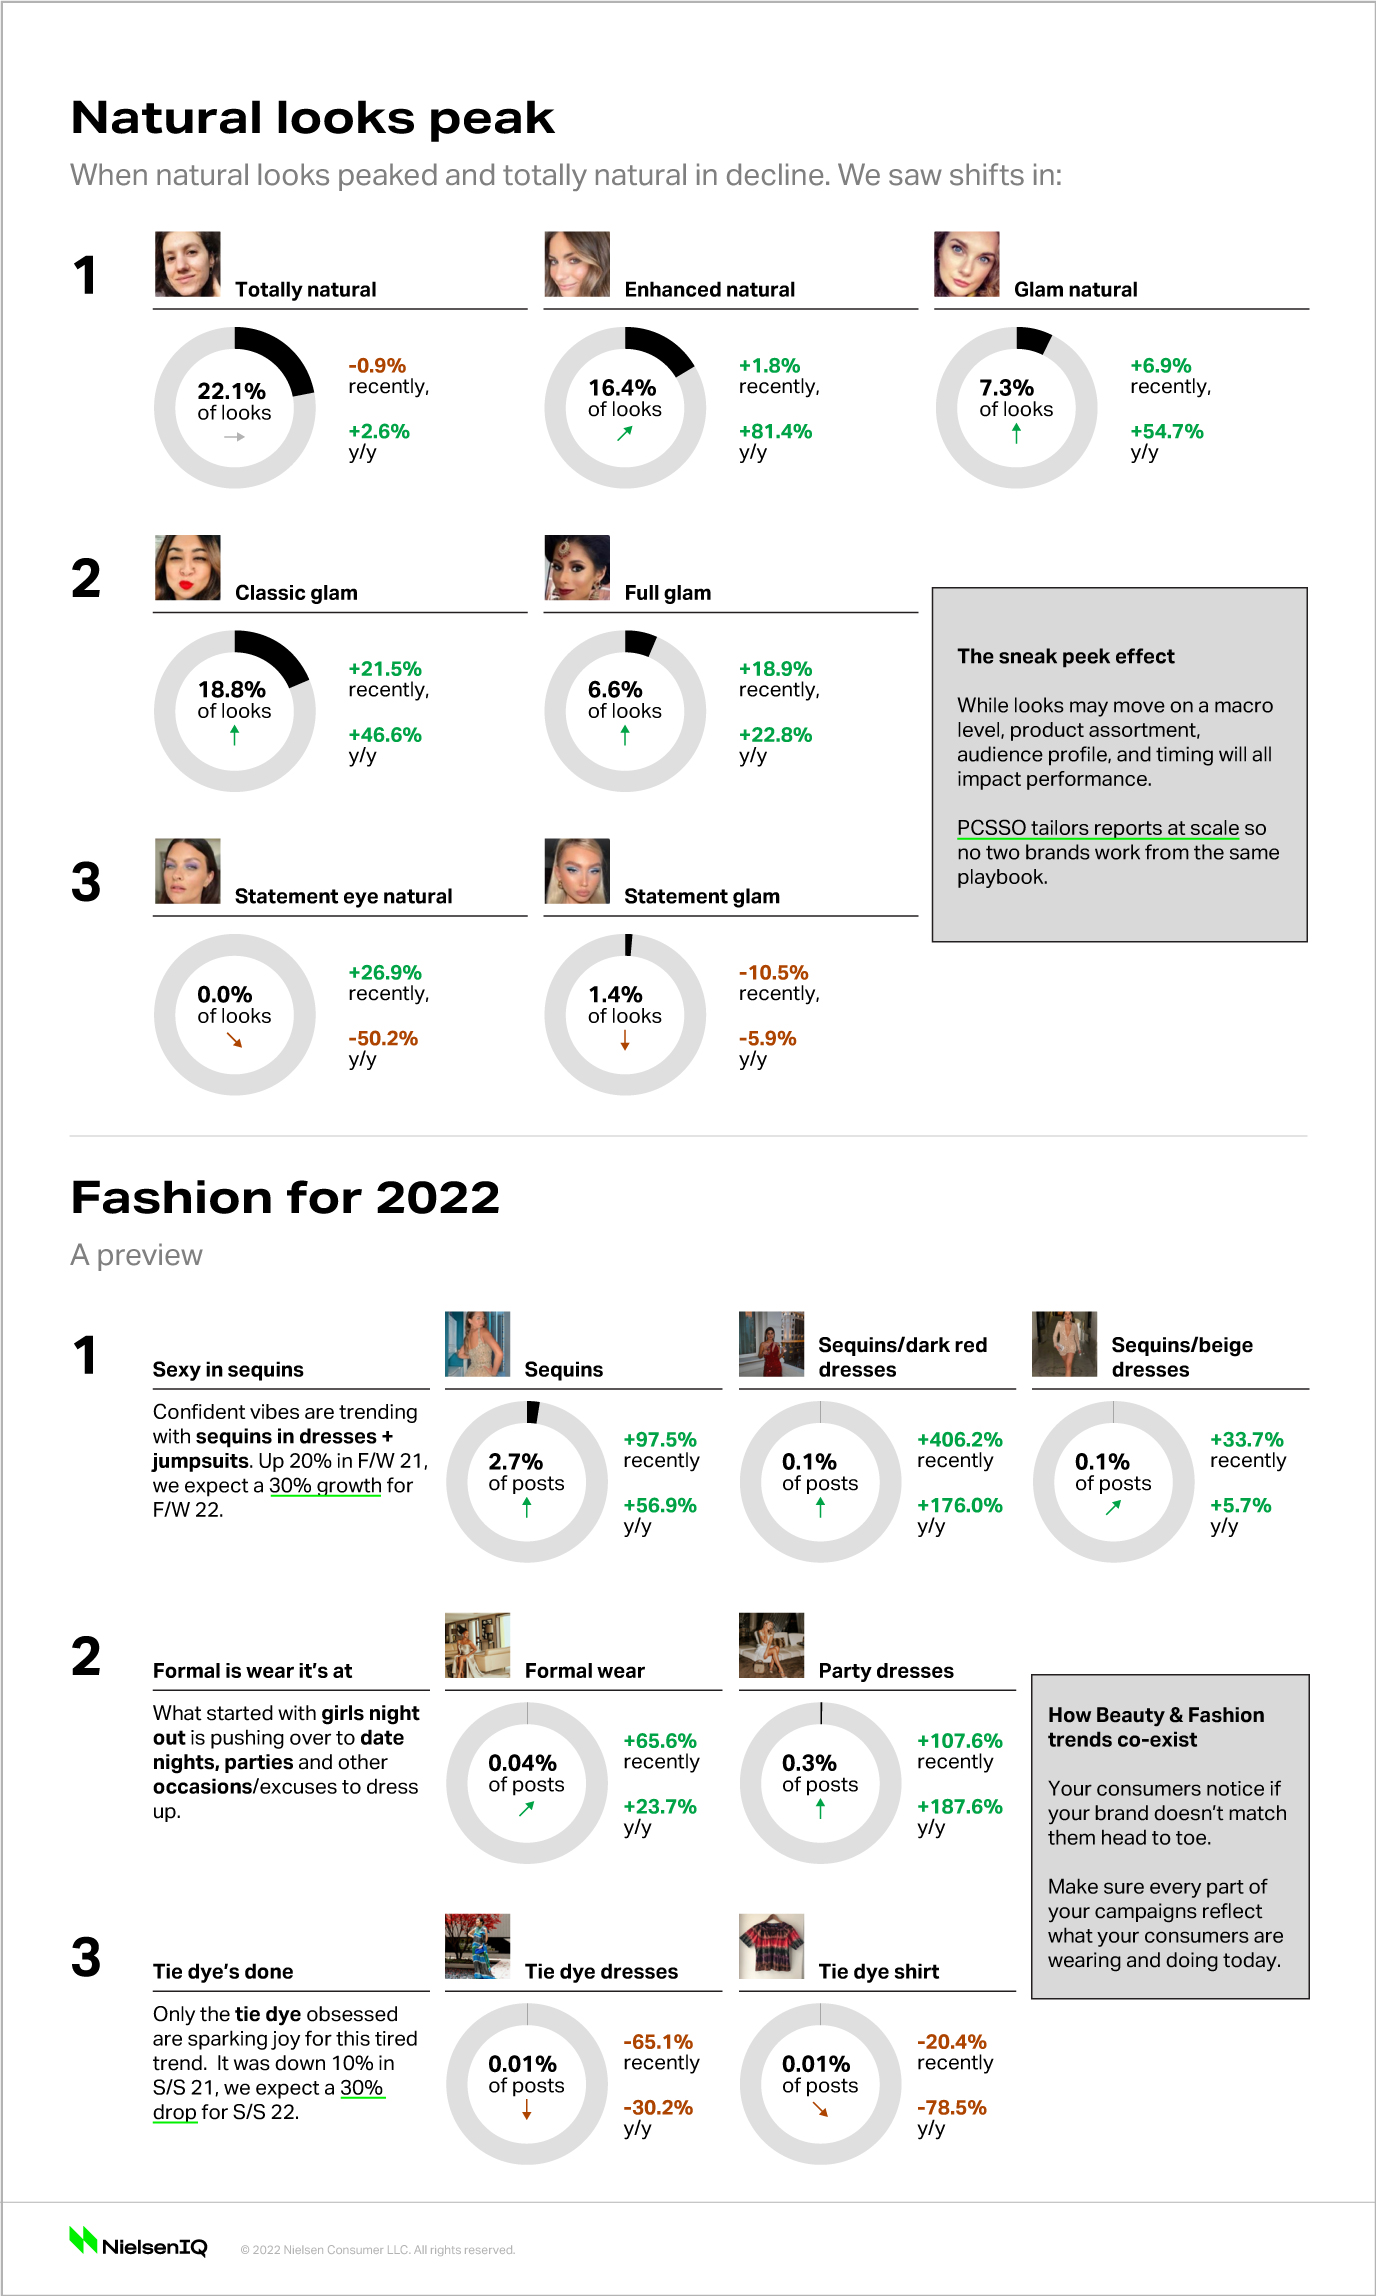 Social media beauty trends by fashion type.